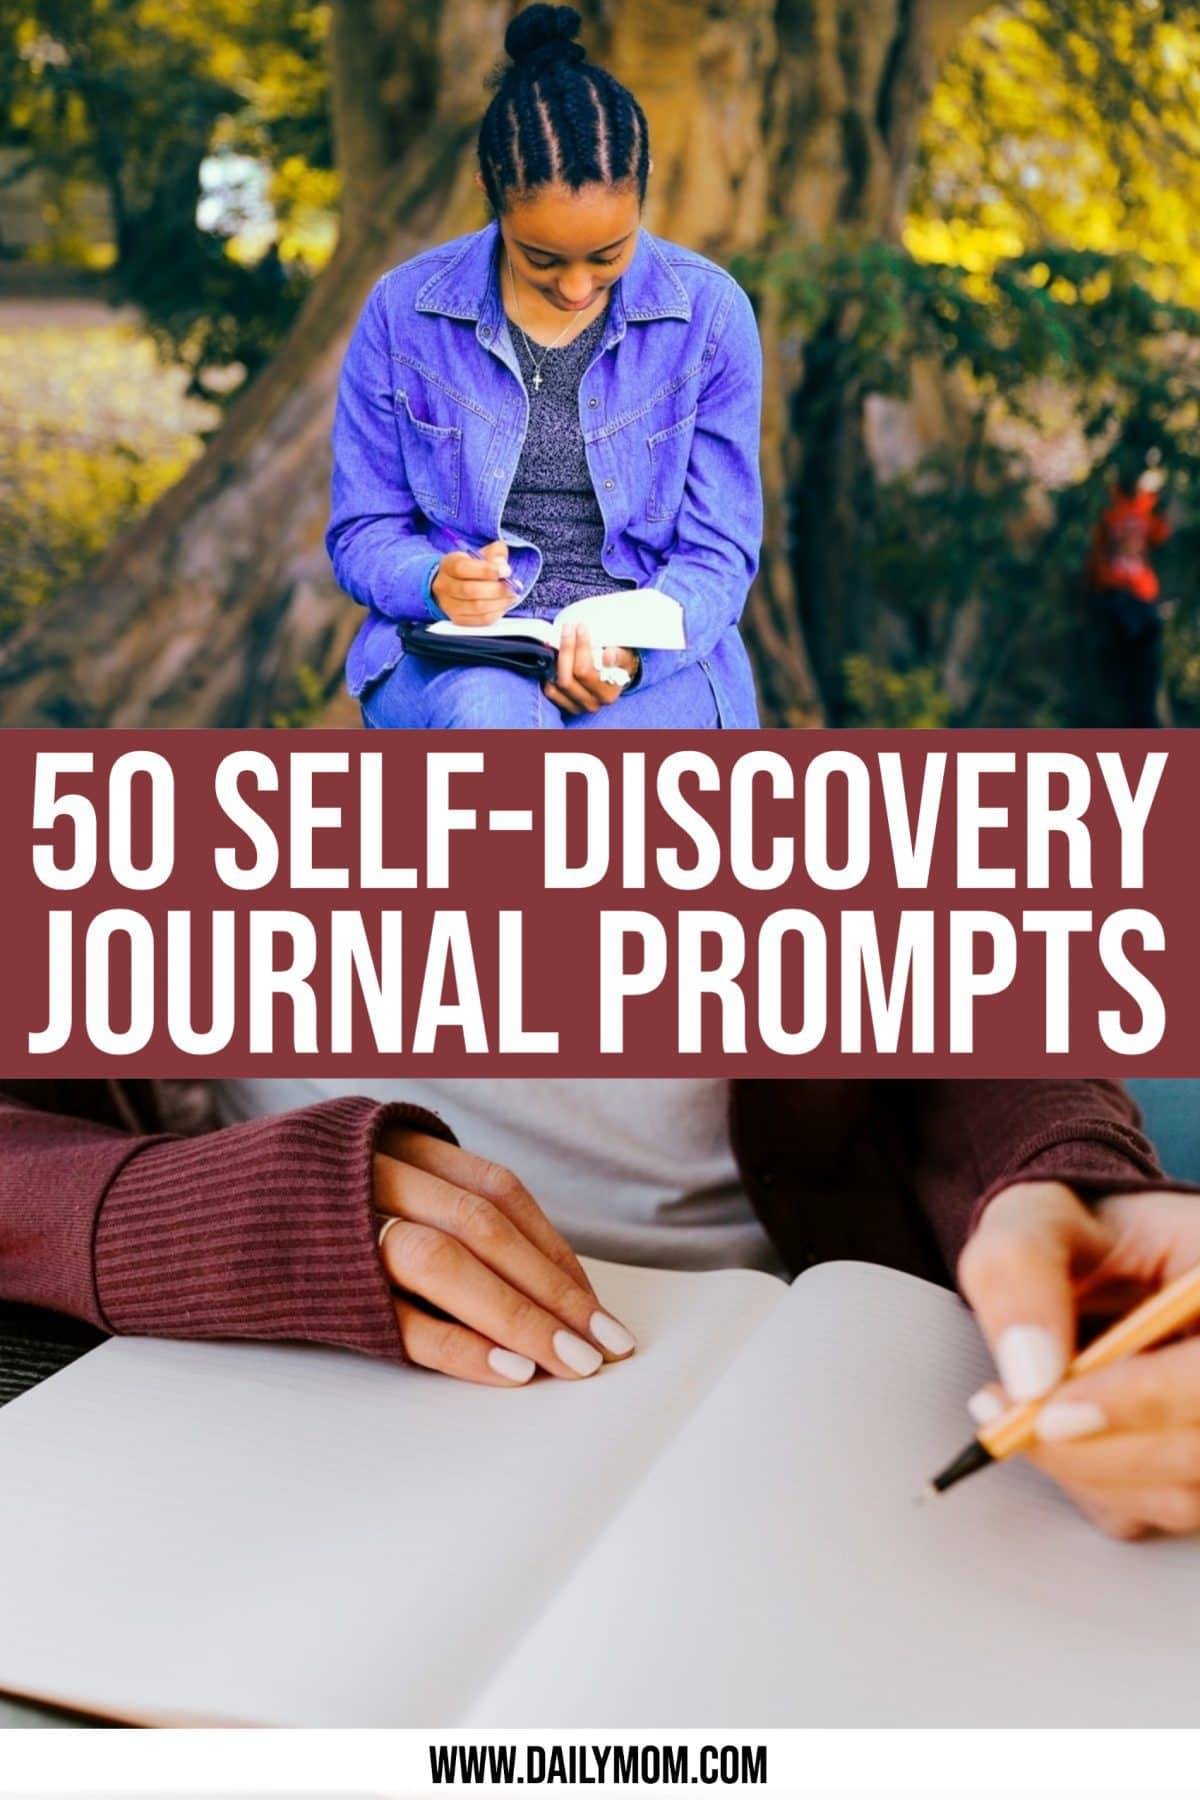 50 Self-Discovery Journal Prompts